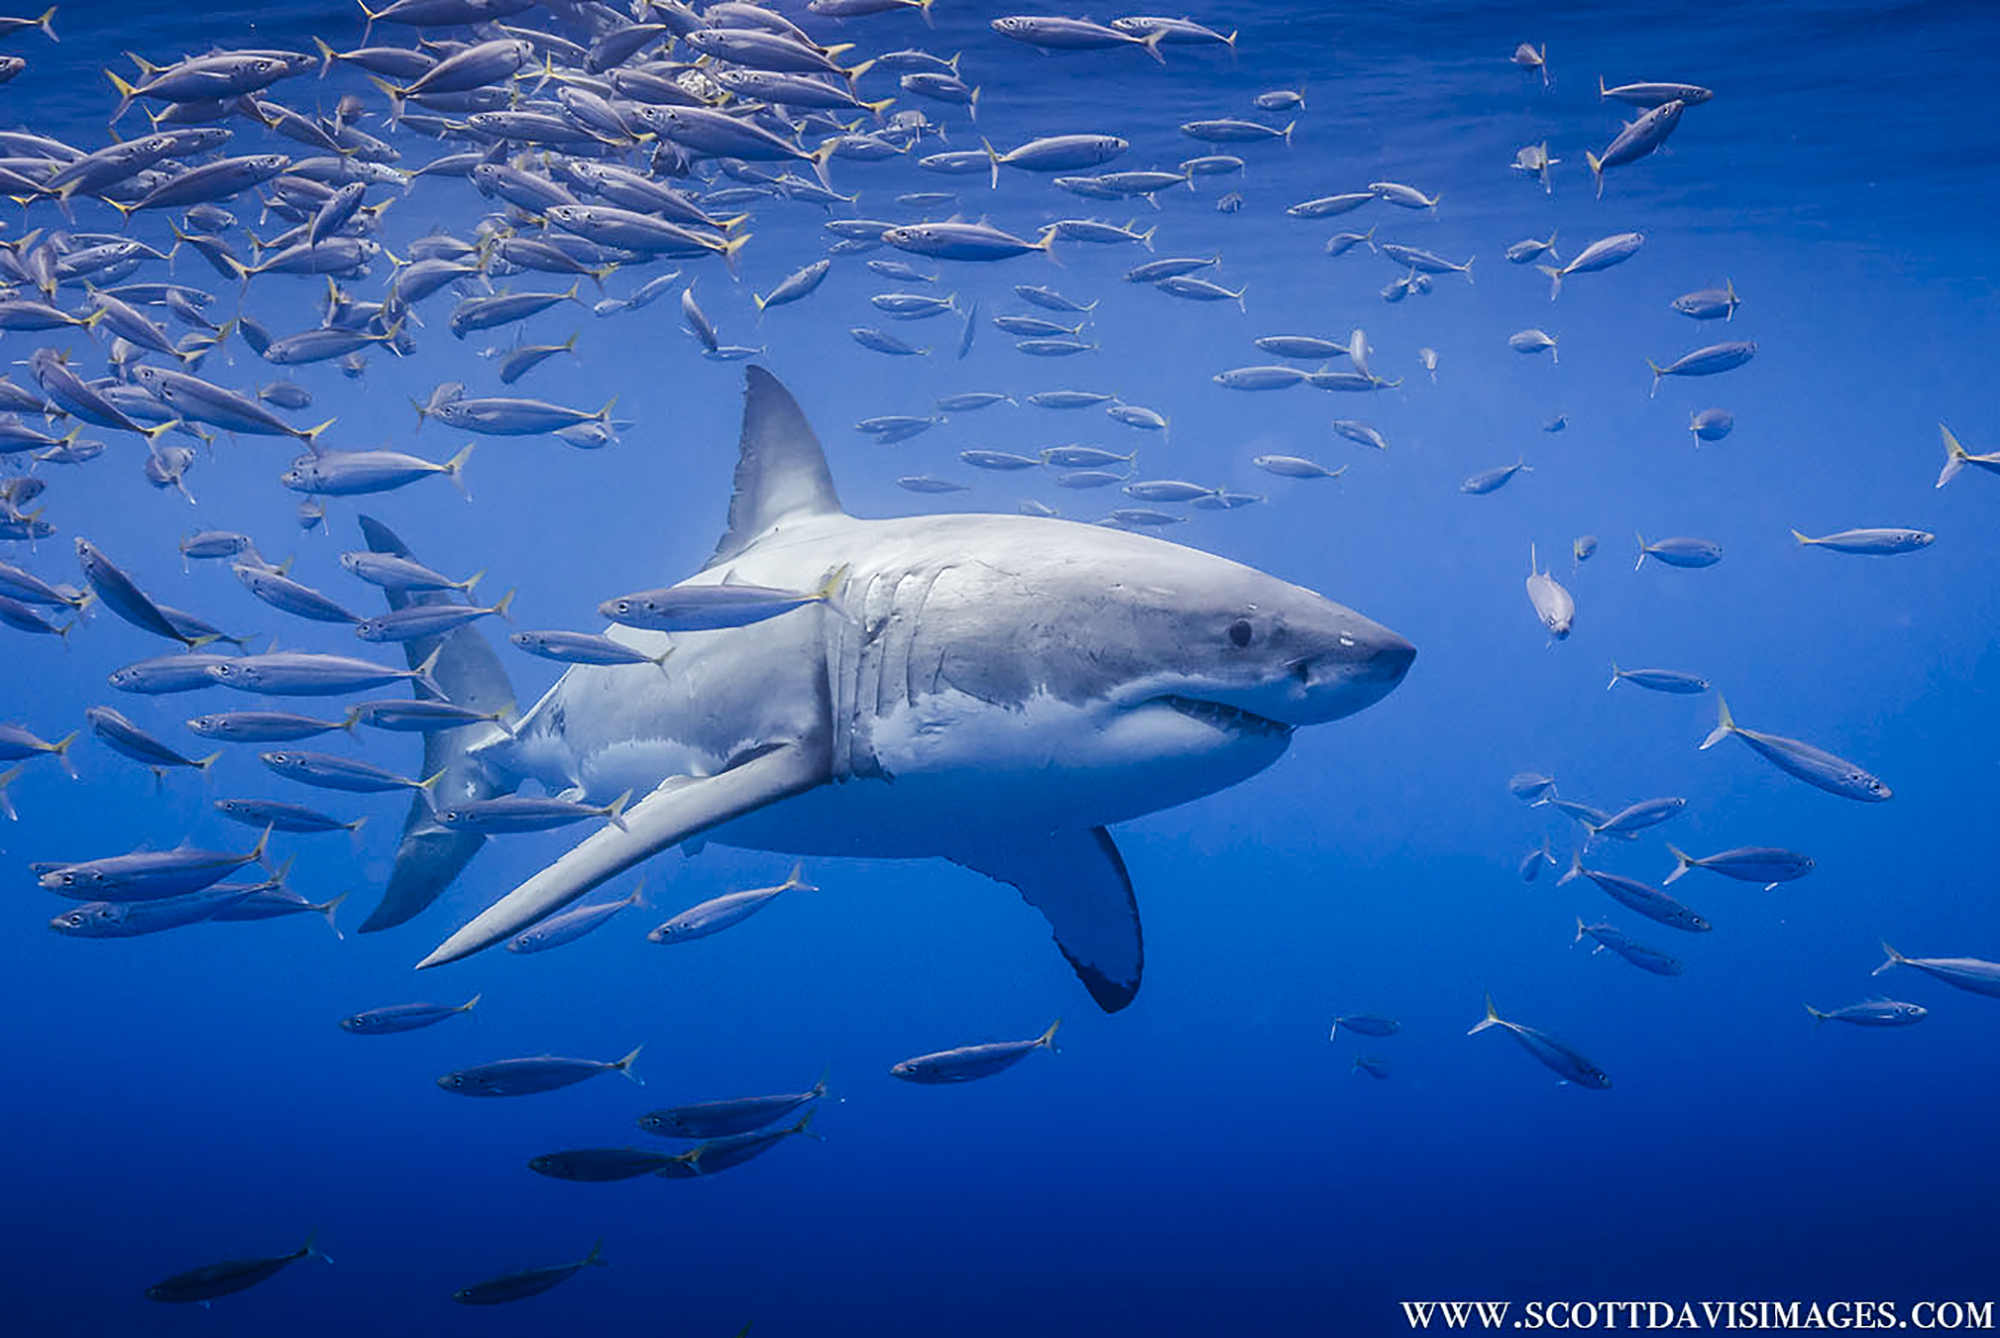 A shark emerges from a school of fish, Photo by Scott Davis